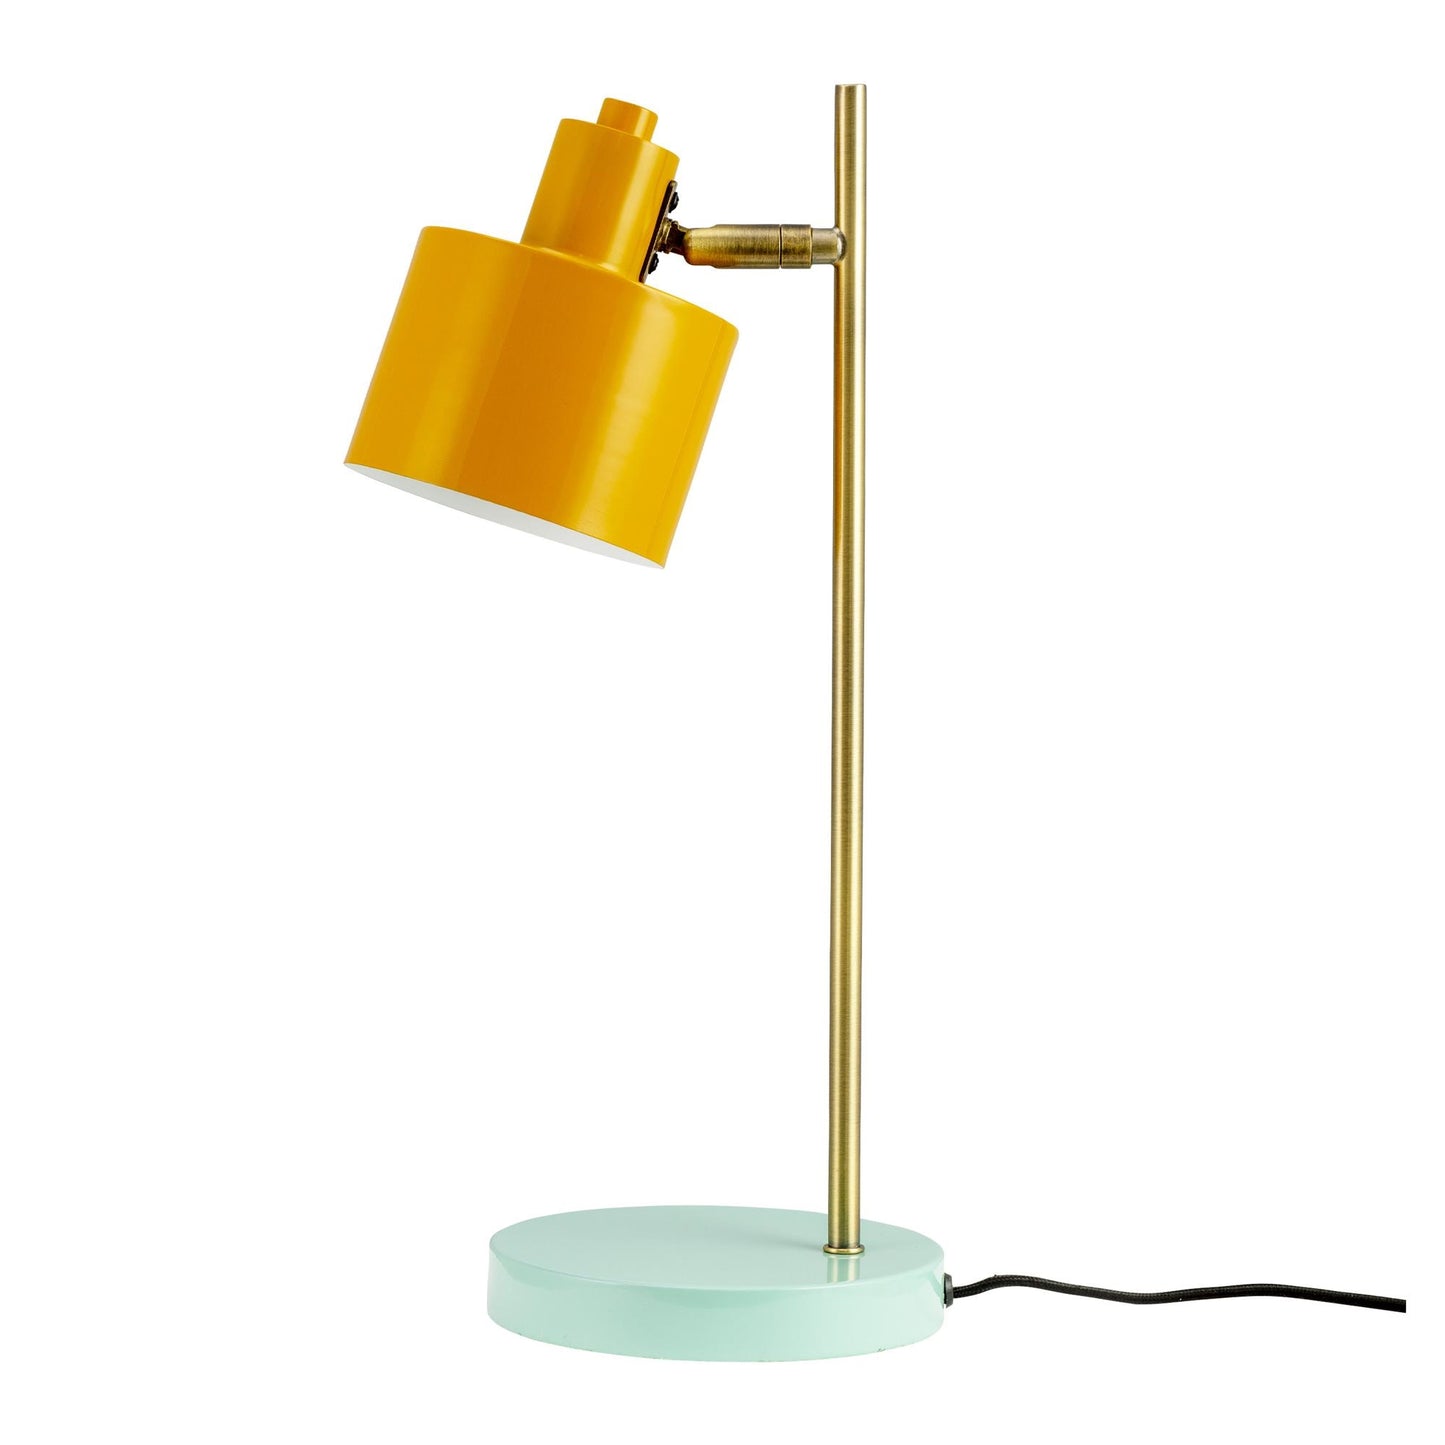 Ocean Table Lamp by Dyberg Larsen #Curry/ Brass/ Turquoise